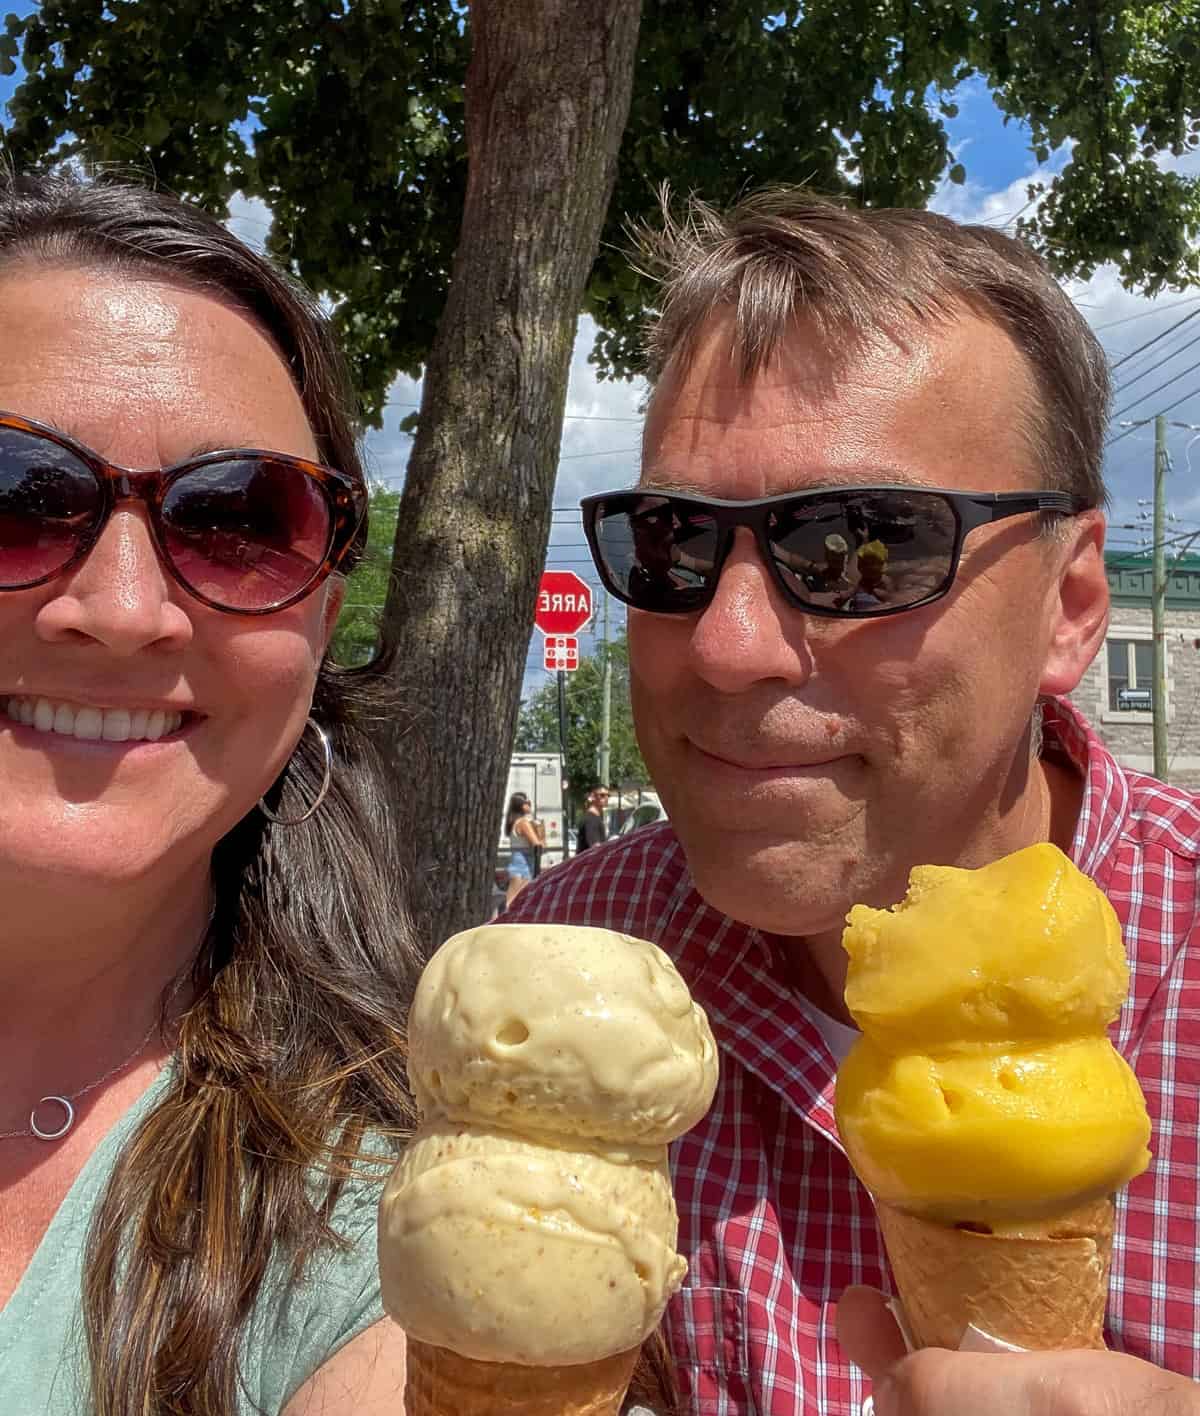 Woman and man wearing sunglasses and holding ice cream cones